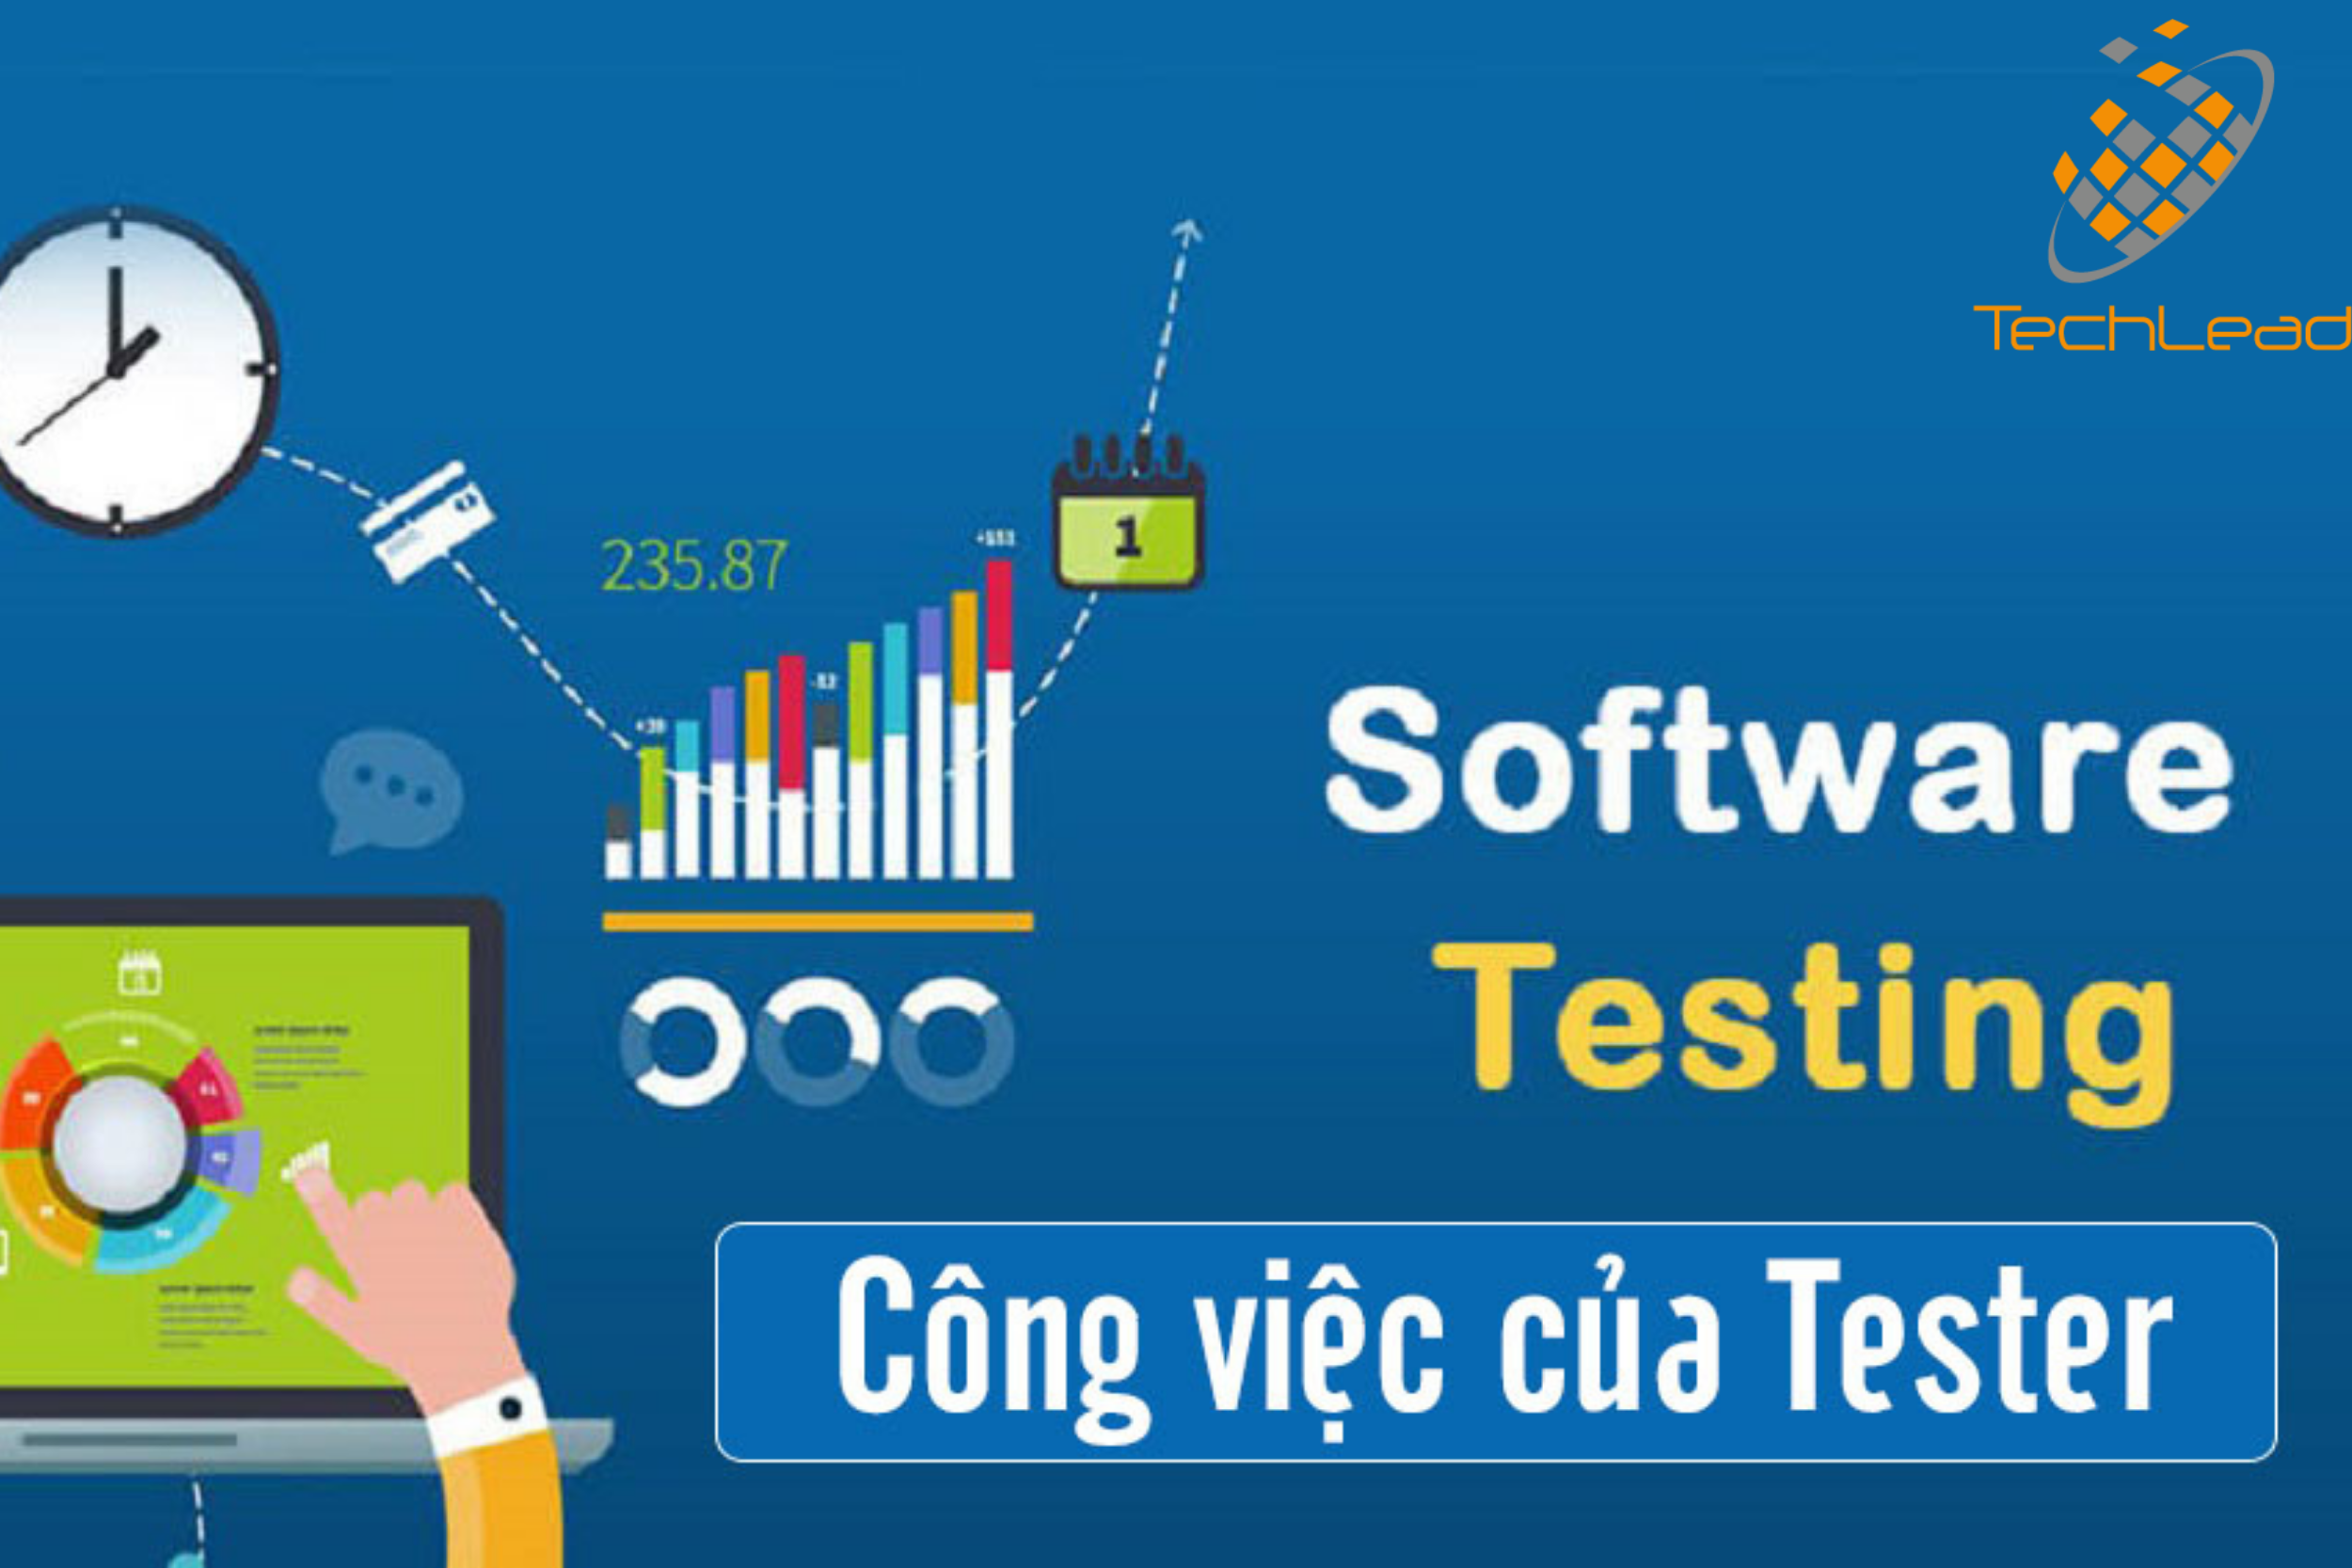 https://www.techlead.vn/wp-content/uploads/2021/11/cong-viec-tester.png